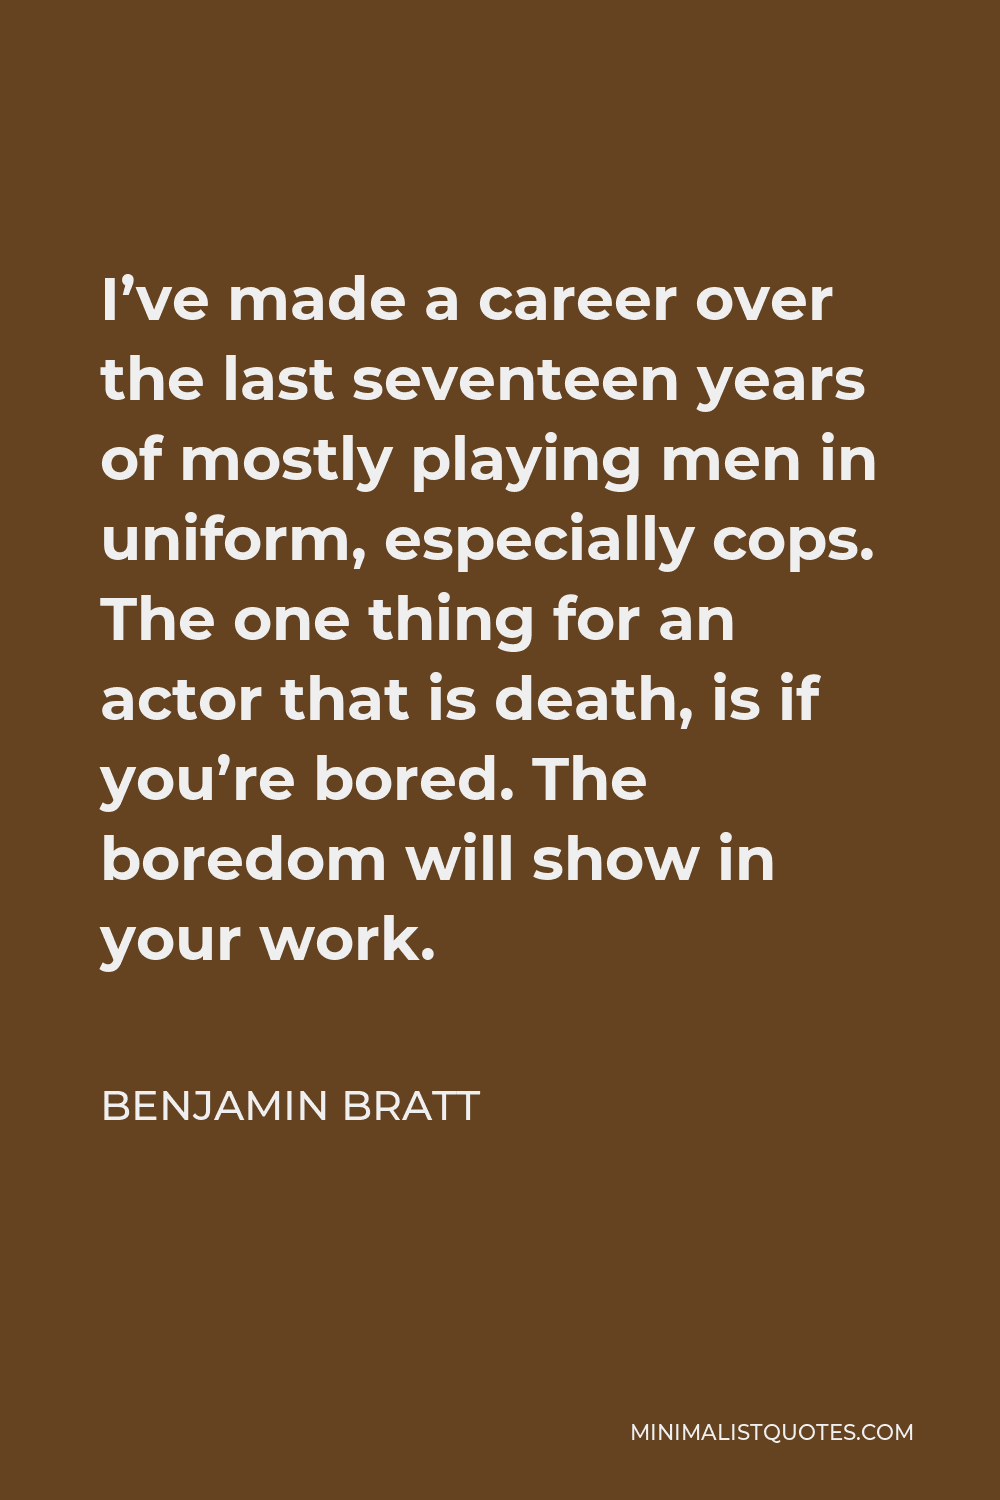 Benjamin Bratt Quote - I’ve made a career over the last seventeen years of mostly playing men in uniform, especially cops. The one thing for an actor that is completely death is if you’re bored, because that boredom will show in your work.